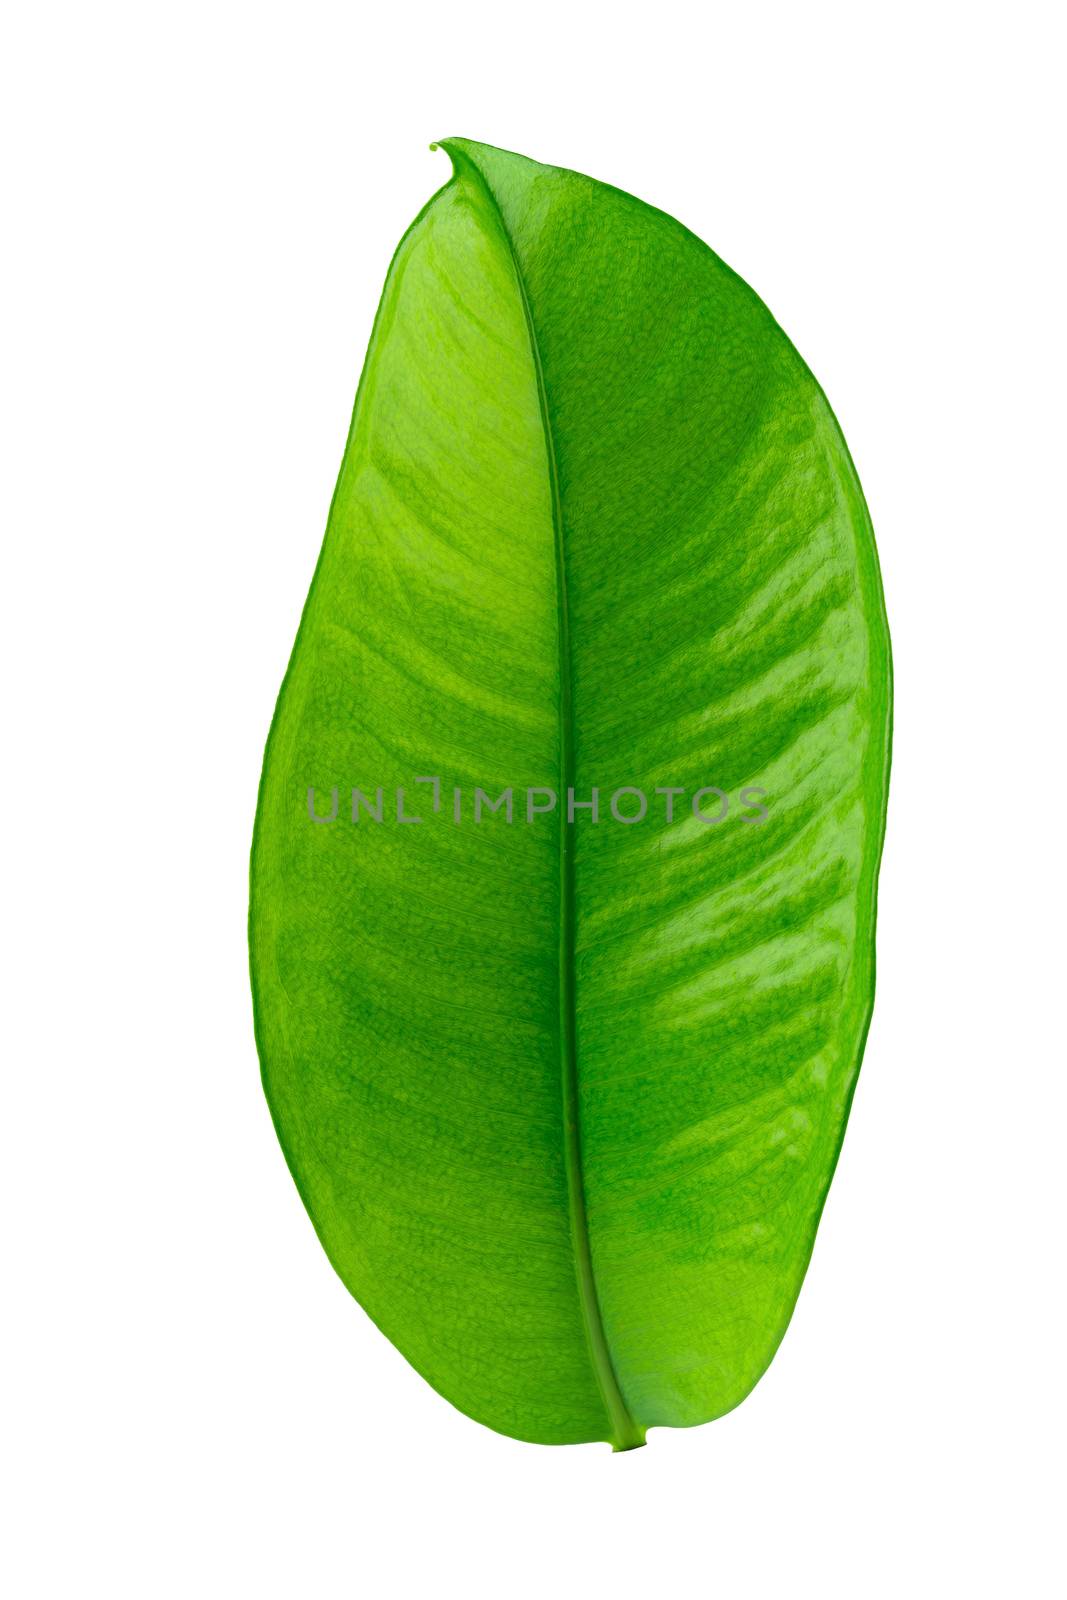 Mangosteen leaves isolated on a white background.